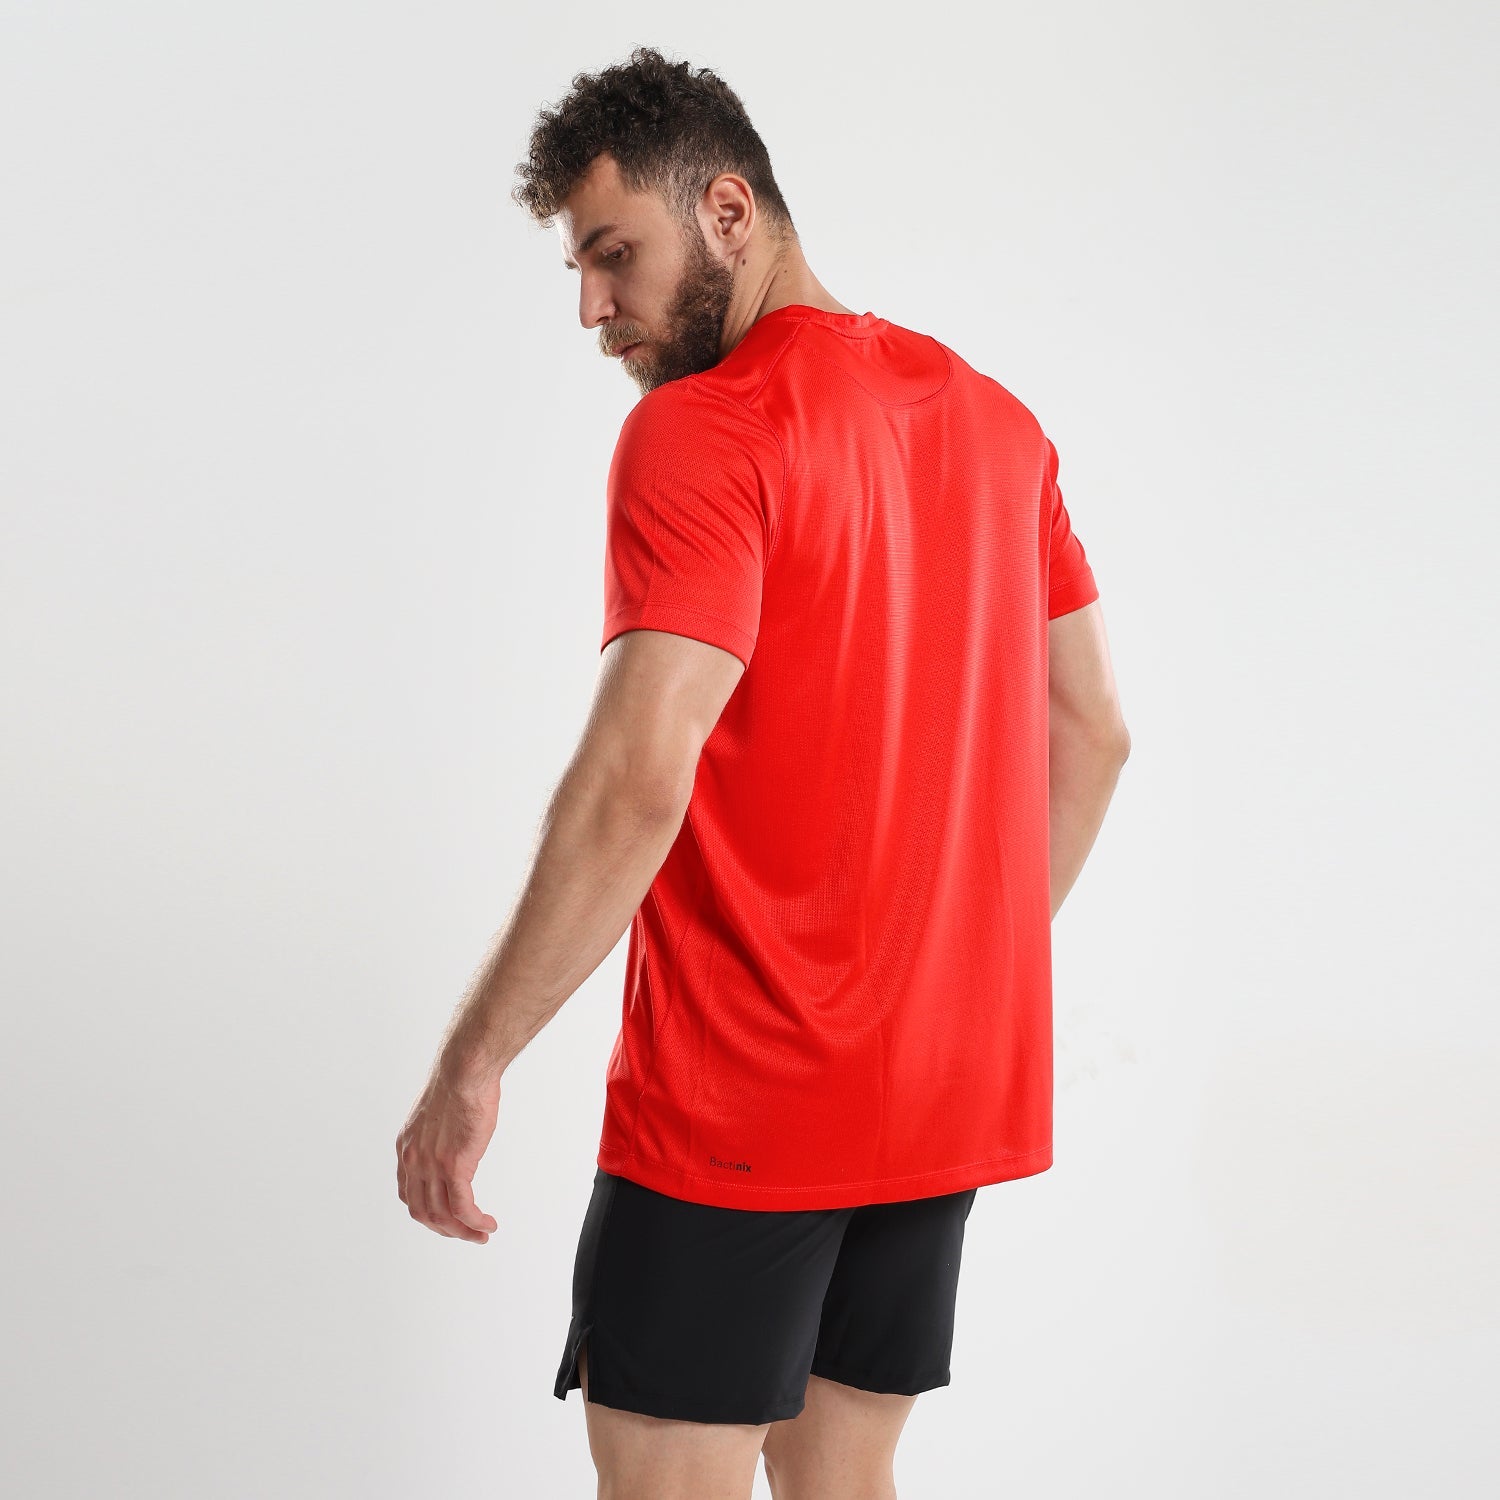 Training T-shirt in High Risk Red